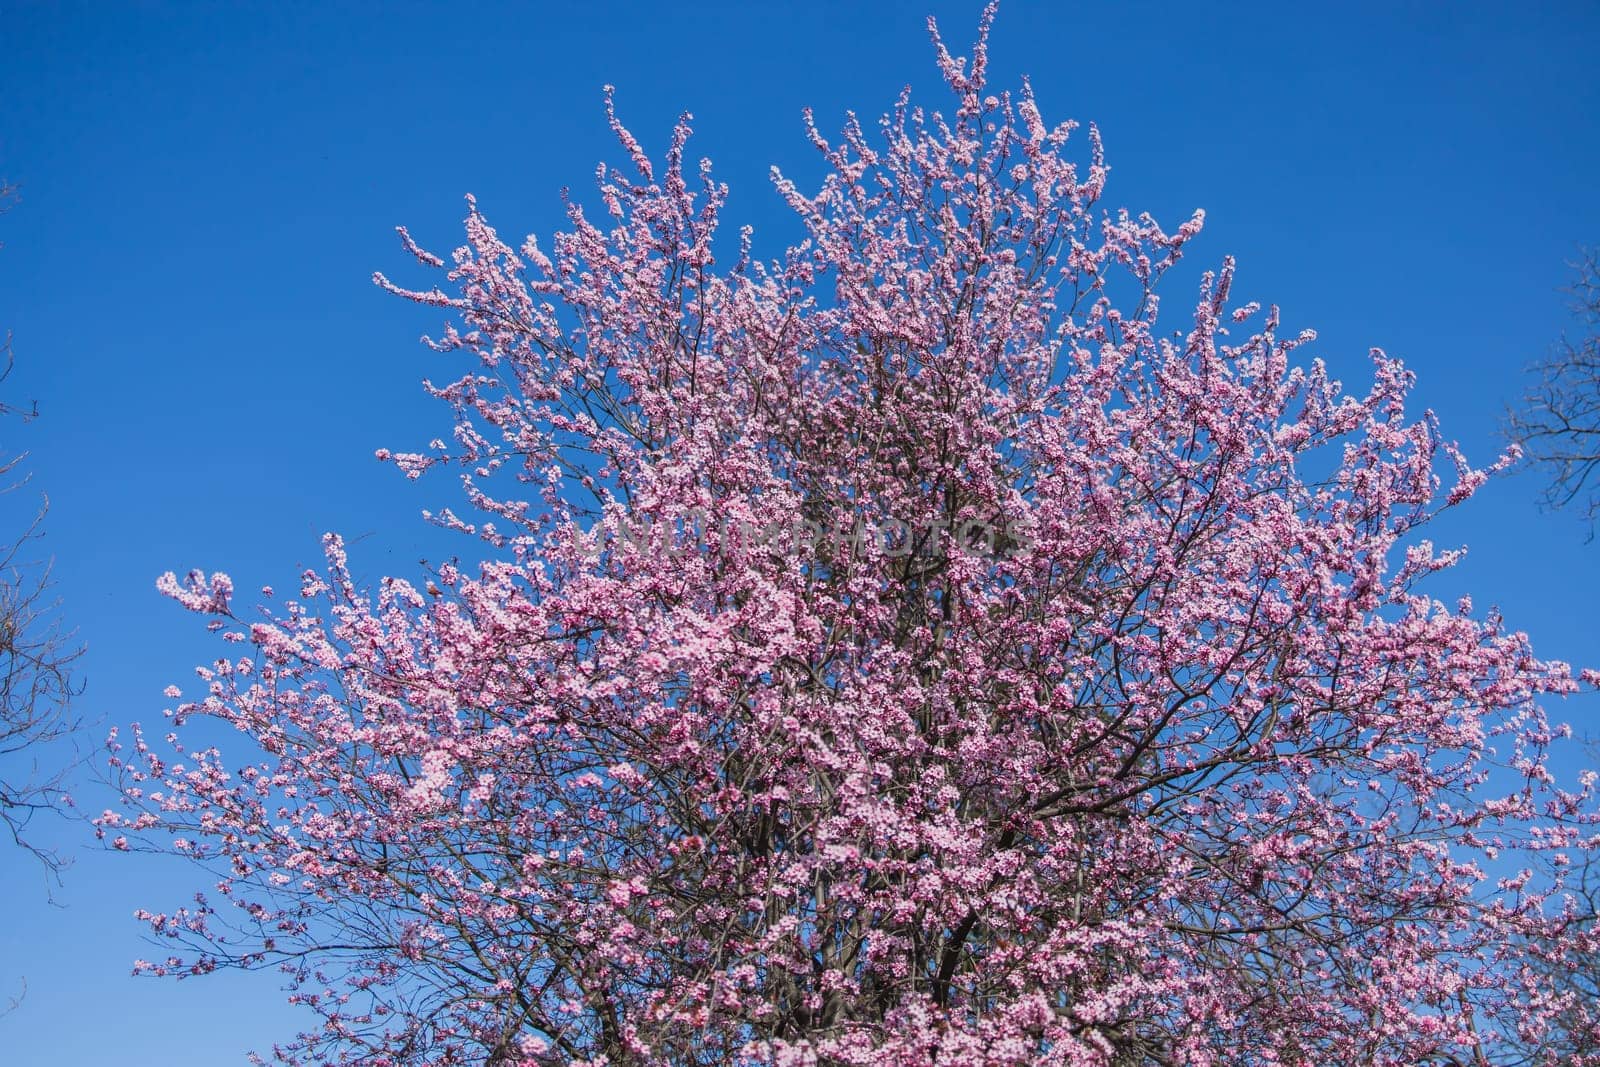 Beautiful branches of pink Cherry blossoms on the tree under blue sky, Beautiful Sakura flowers during spring season in the park, Flora pattern texture, Nature floral background. Copy space and empty place for advertising by Satura86